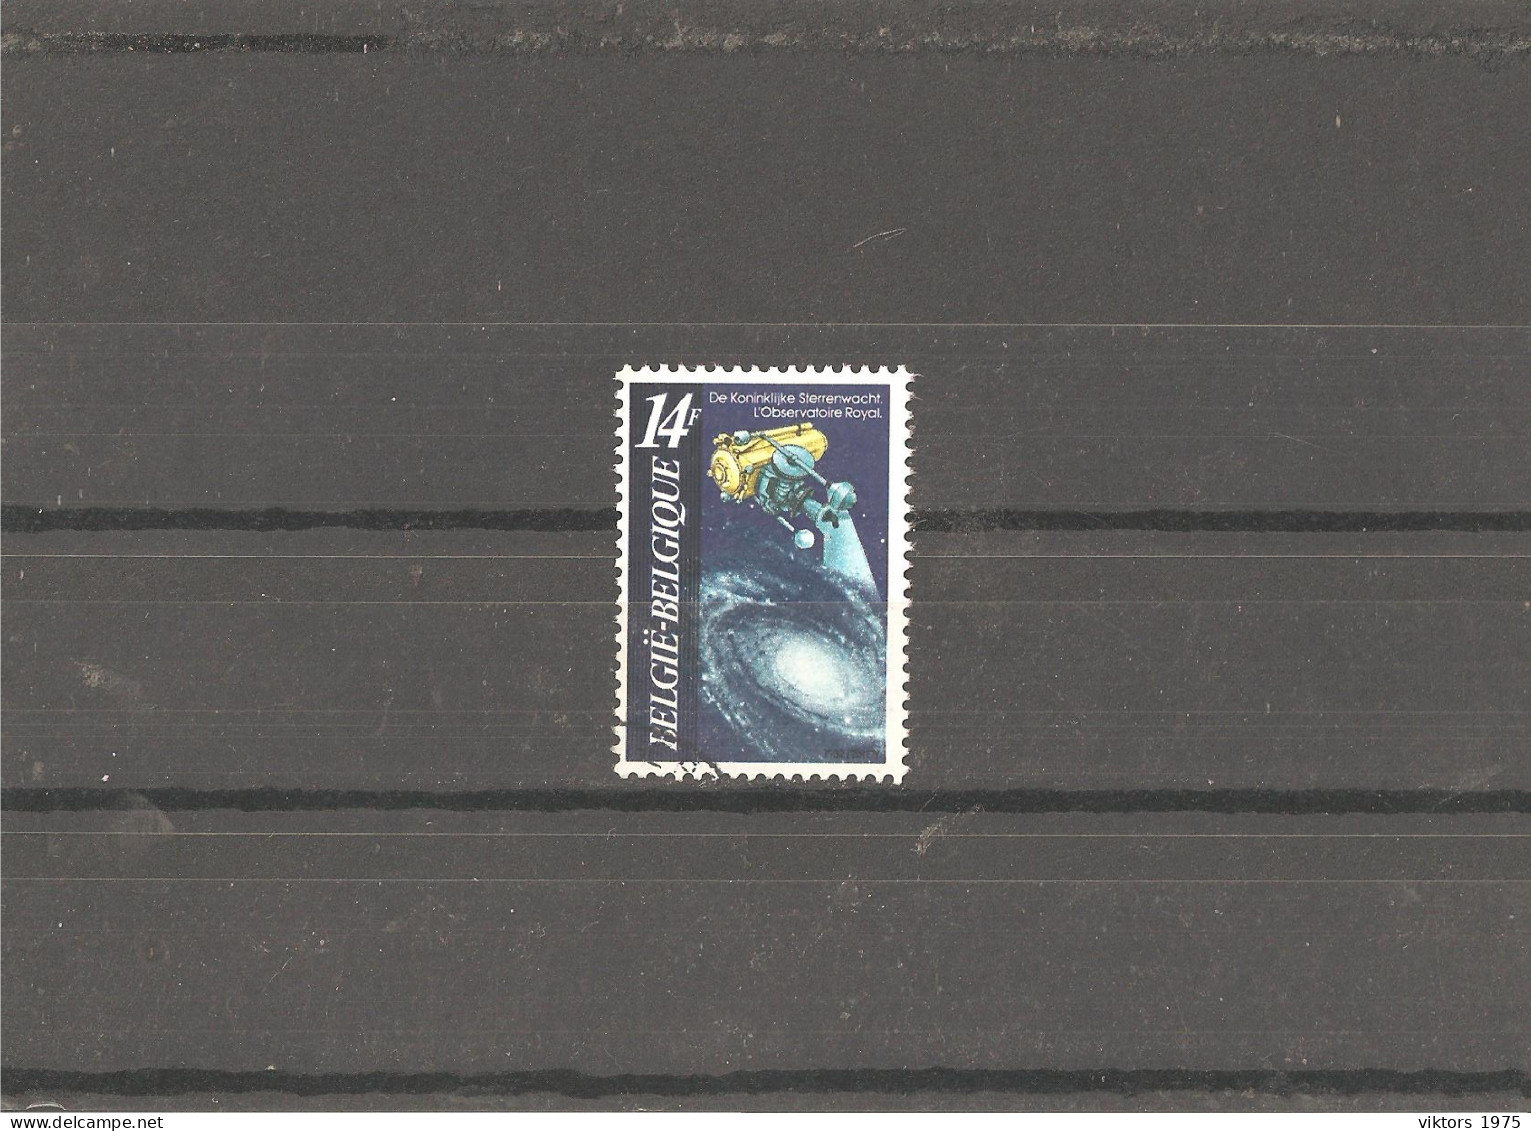 Used Stamp Nr.2089 In MICHEL Catalog - Used Stamps